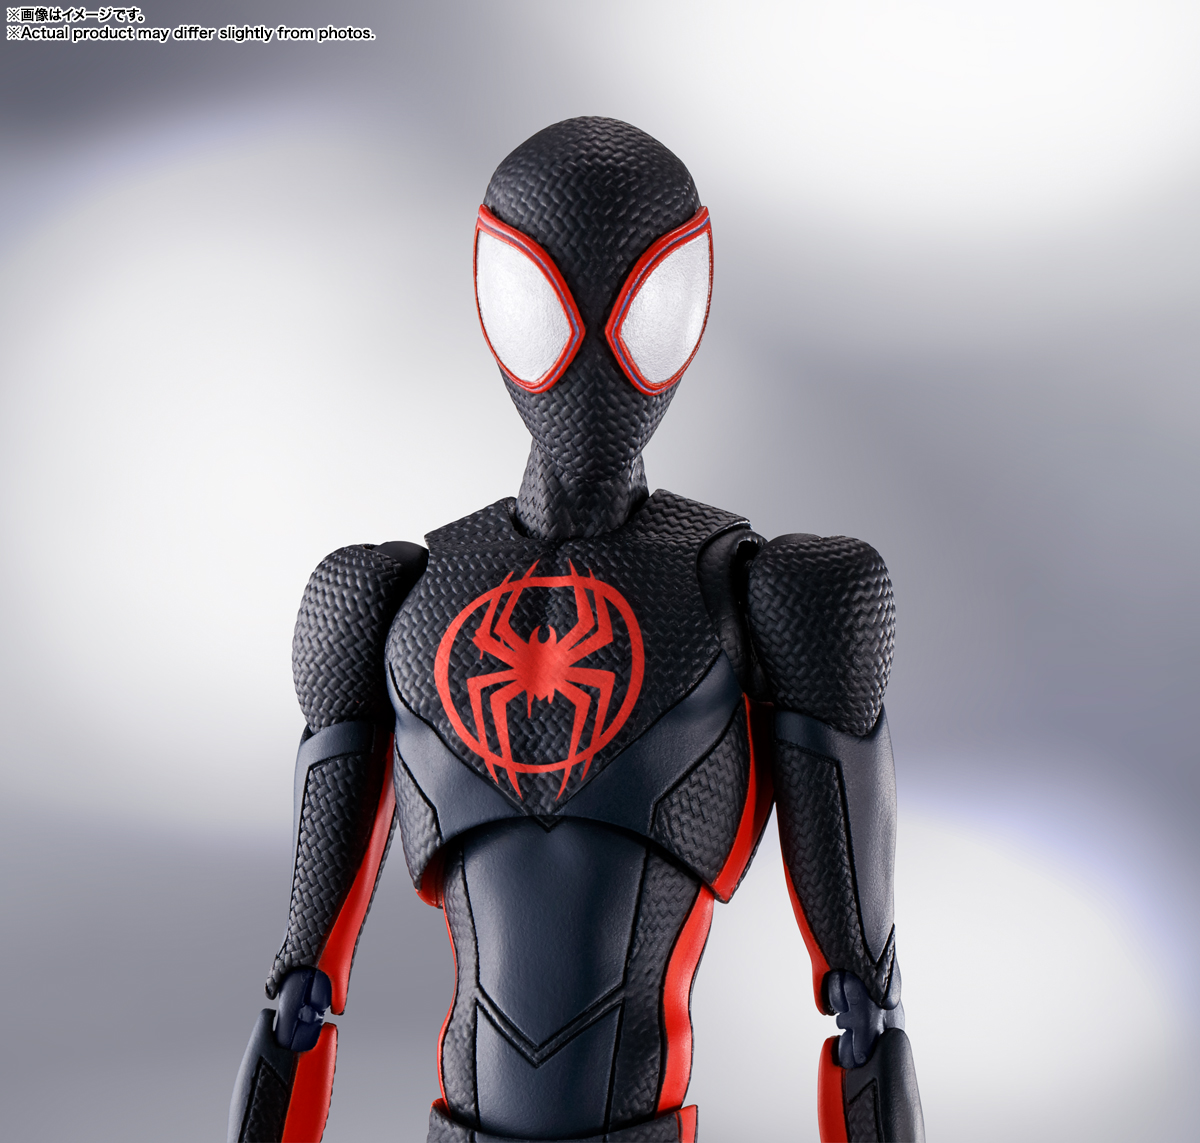 Spider-Man: Across the Spider-Verse Figures S.H.Figuarts (S.H. Figure Arts) Spider-Man (Miles Morales) (Spider-Man:Across the Spider-Verse)